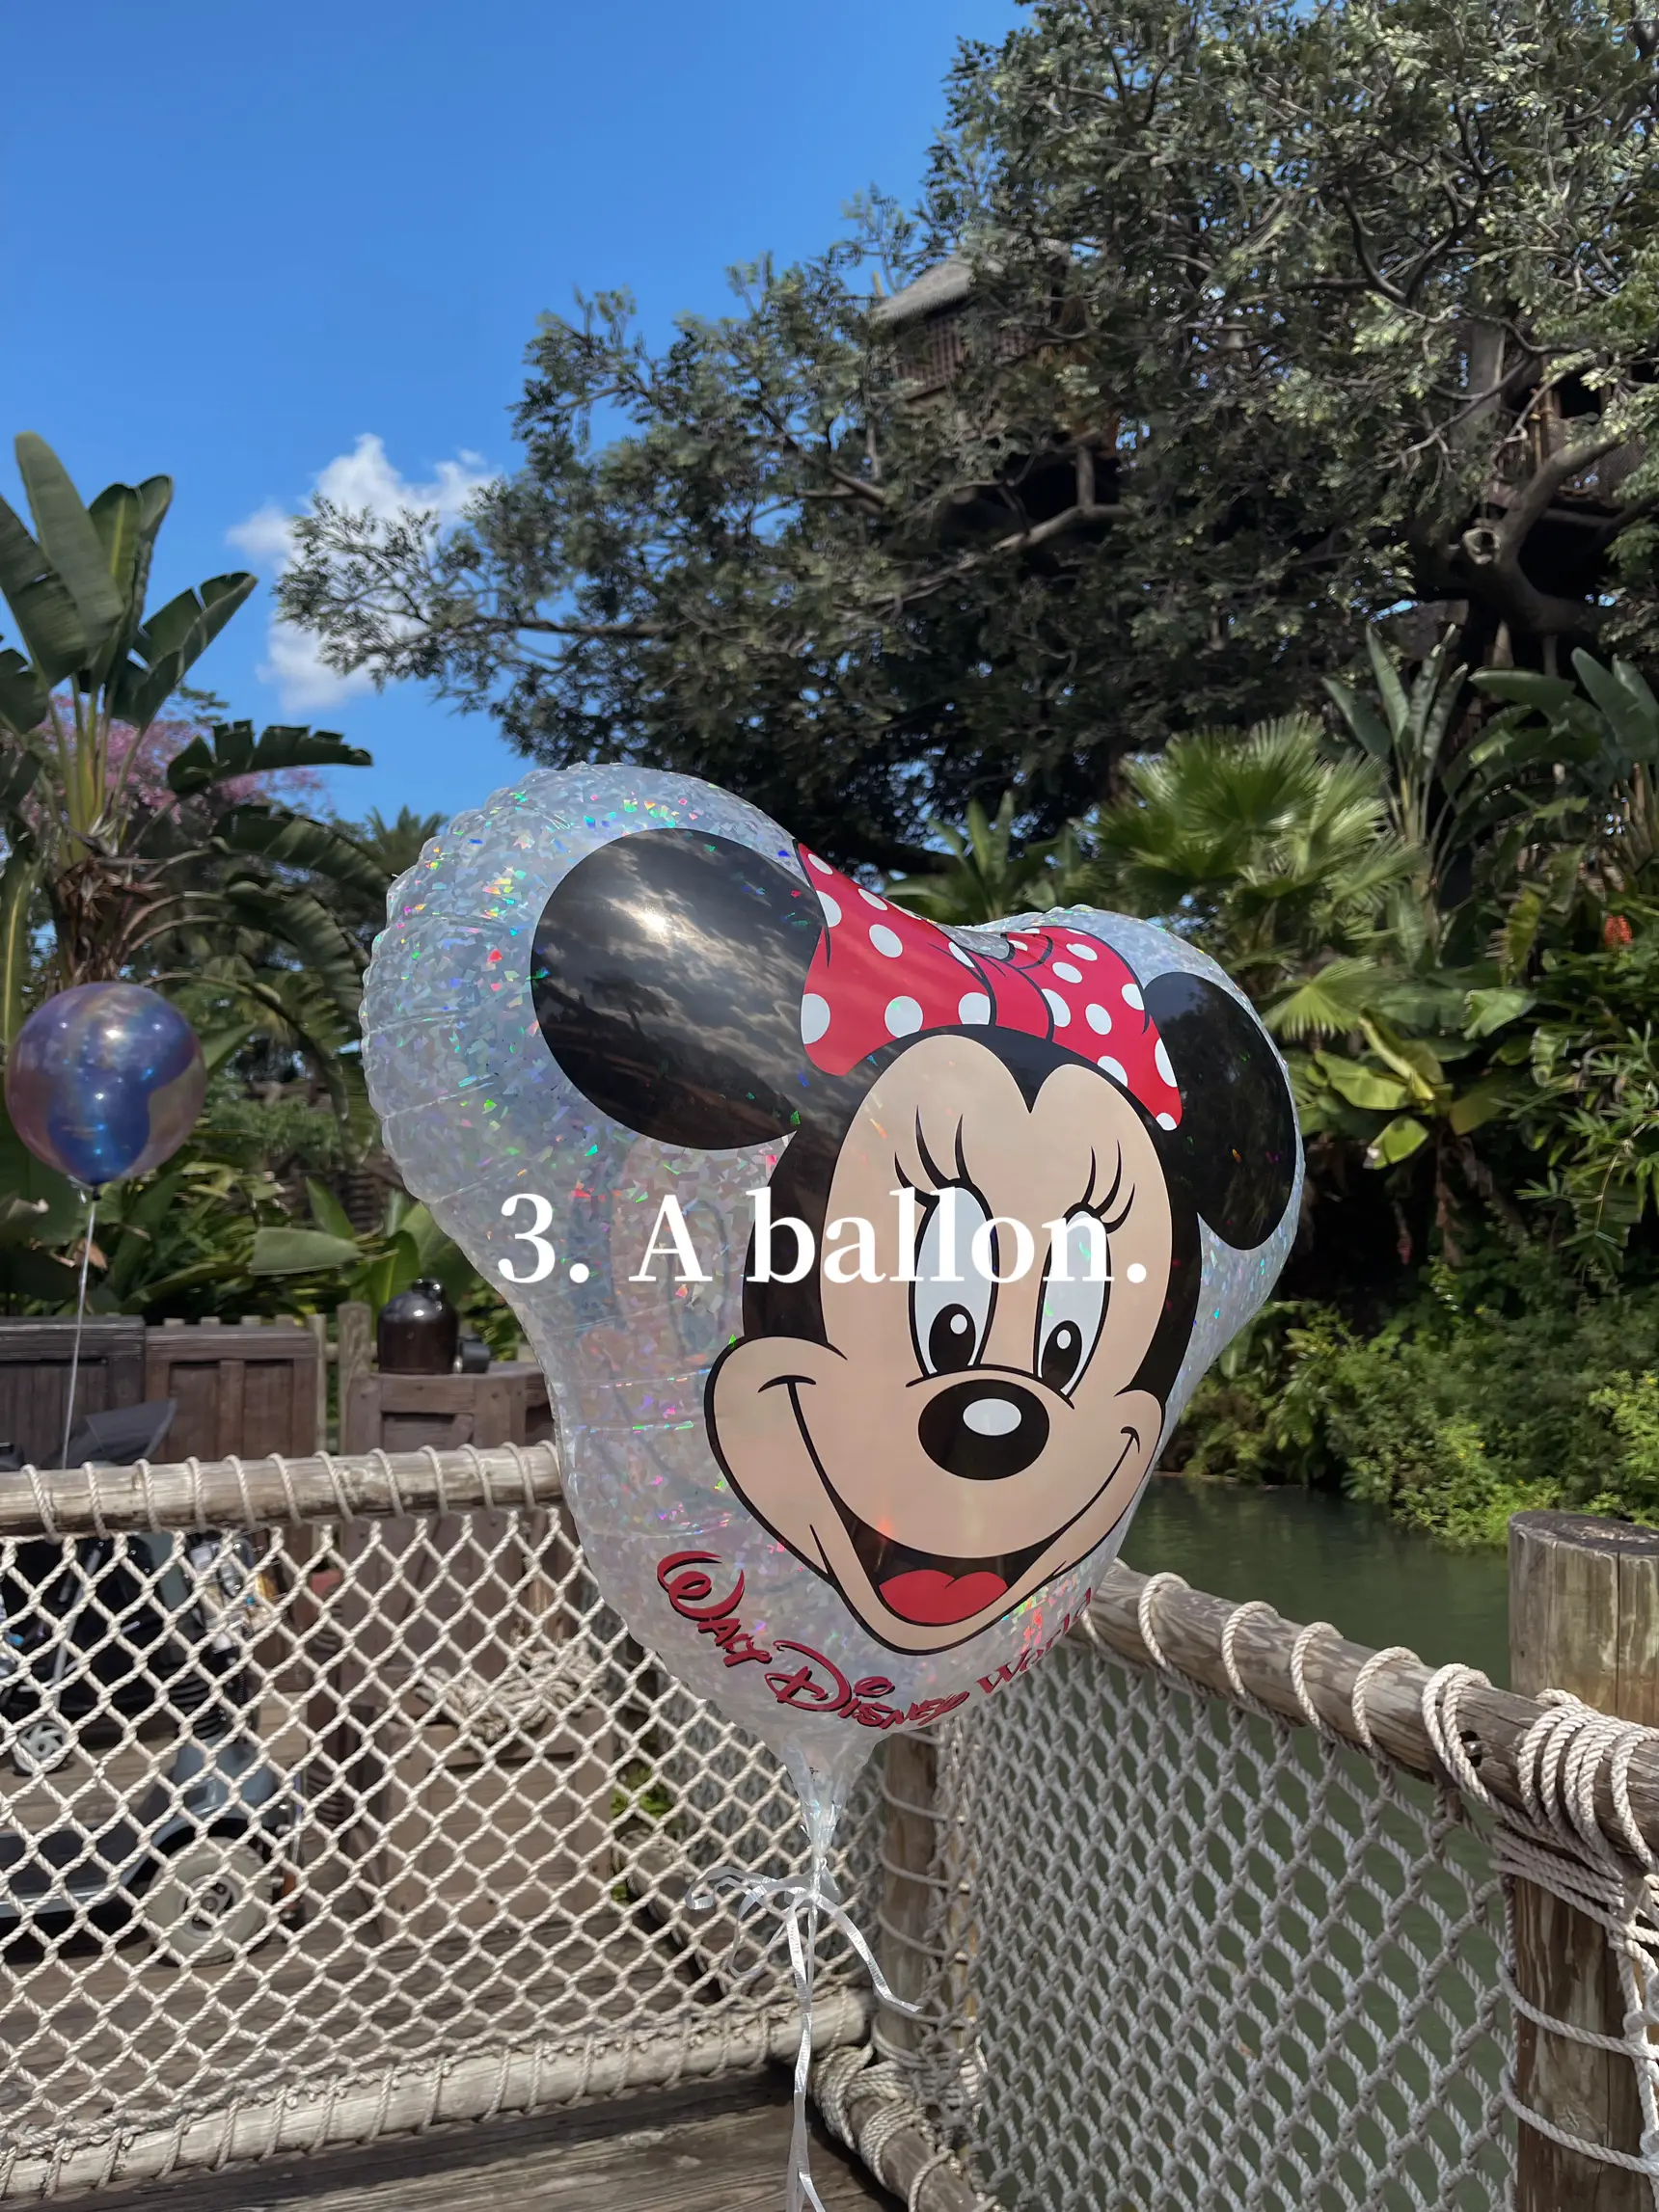  A balloon with a Minnie Mouse design on it.